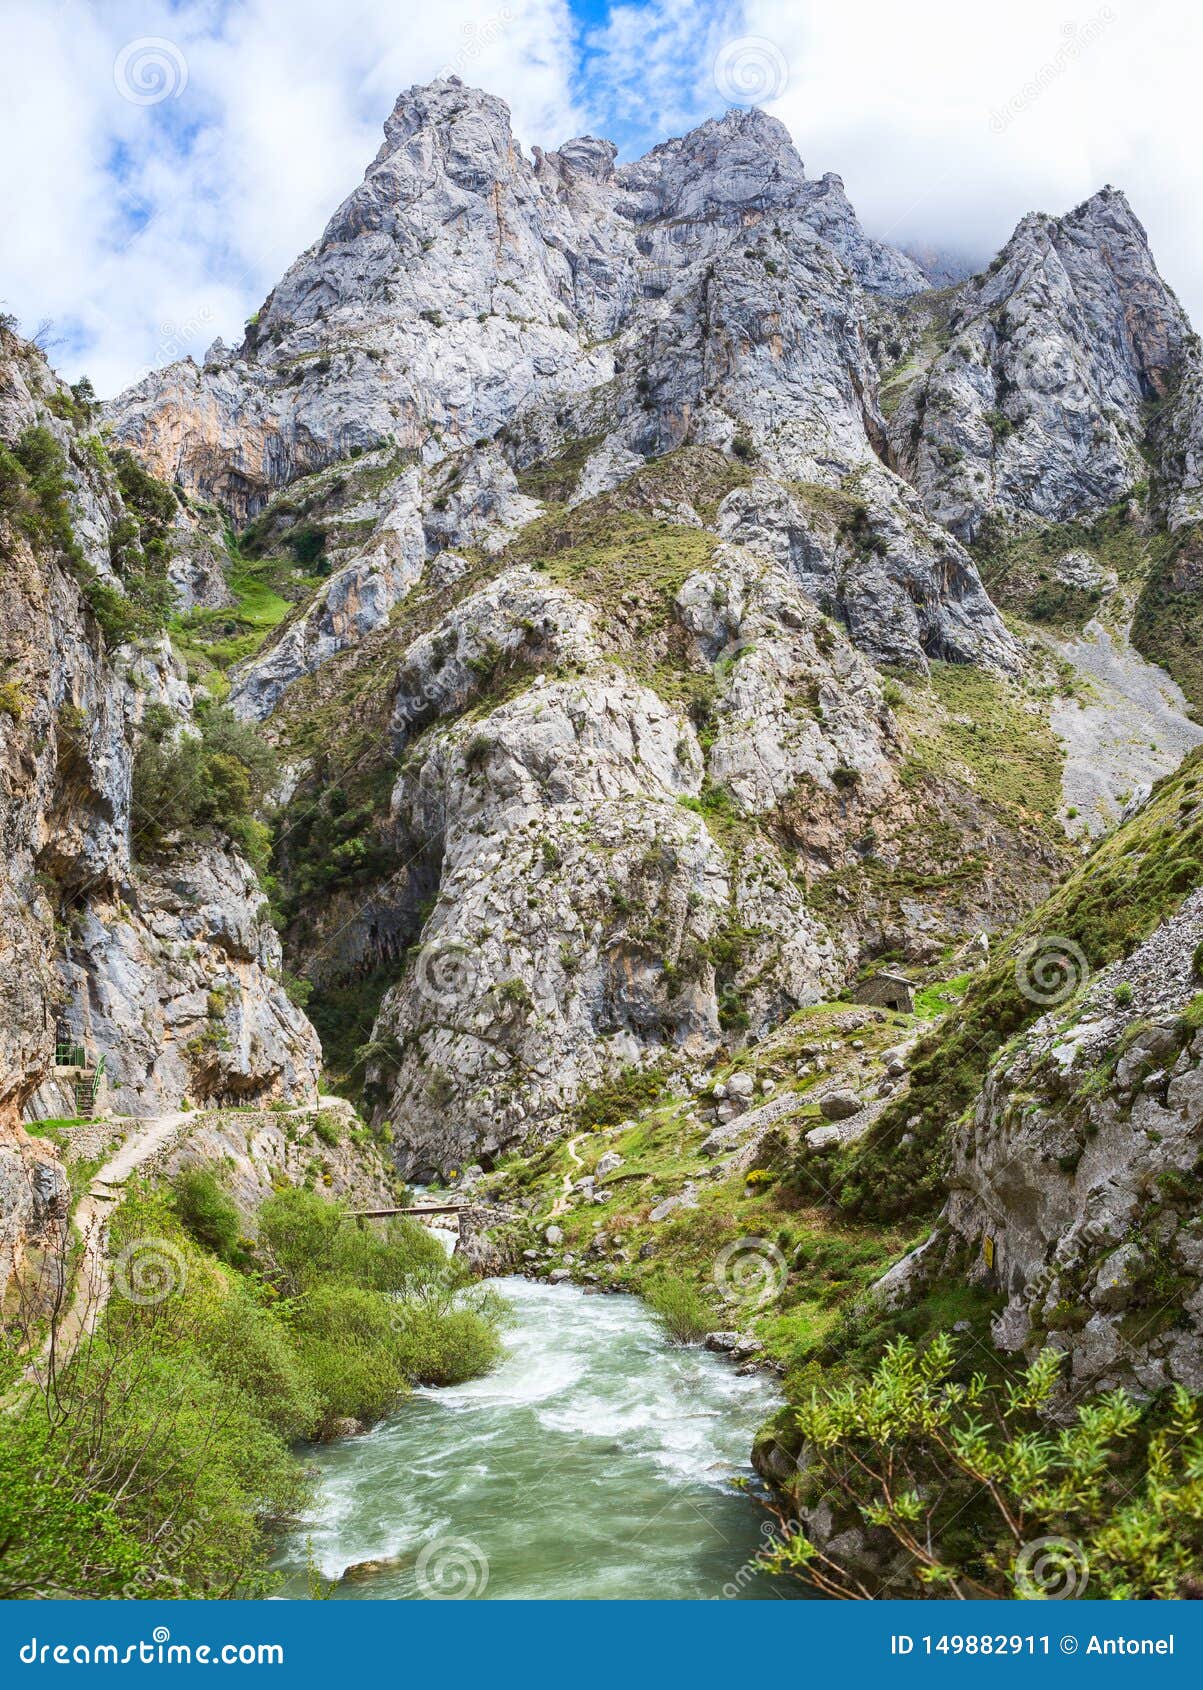 view from hiking trail cares trail or ruta del cares along river cares in spring near cain, picos de europa national park,